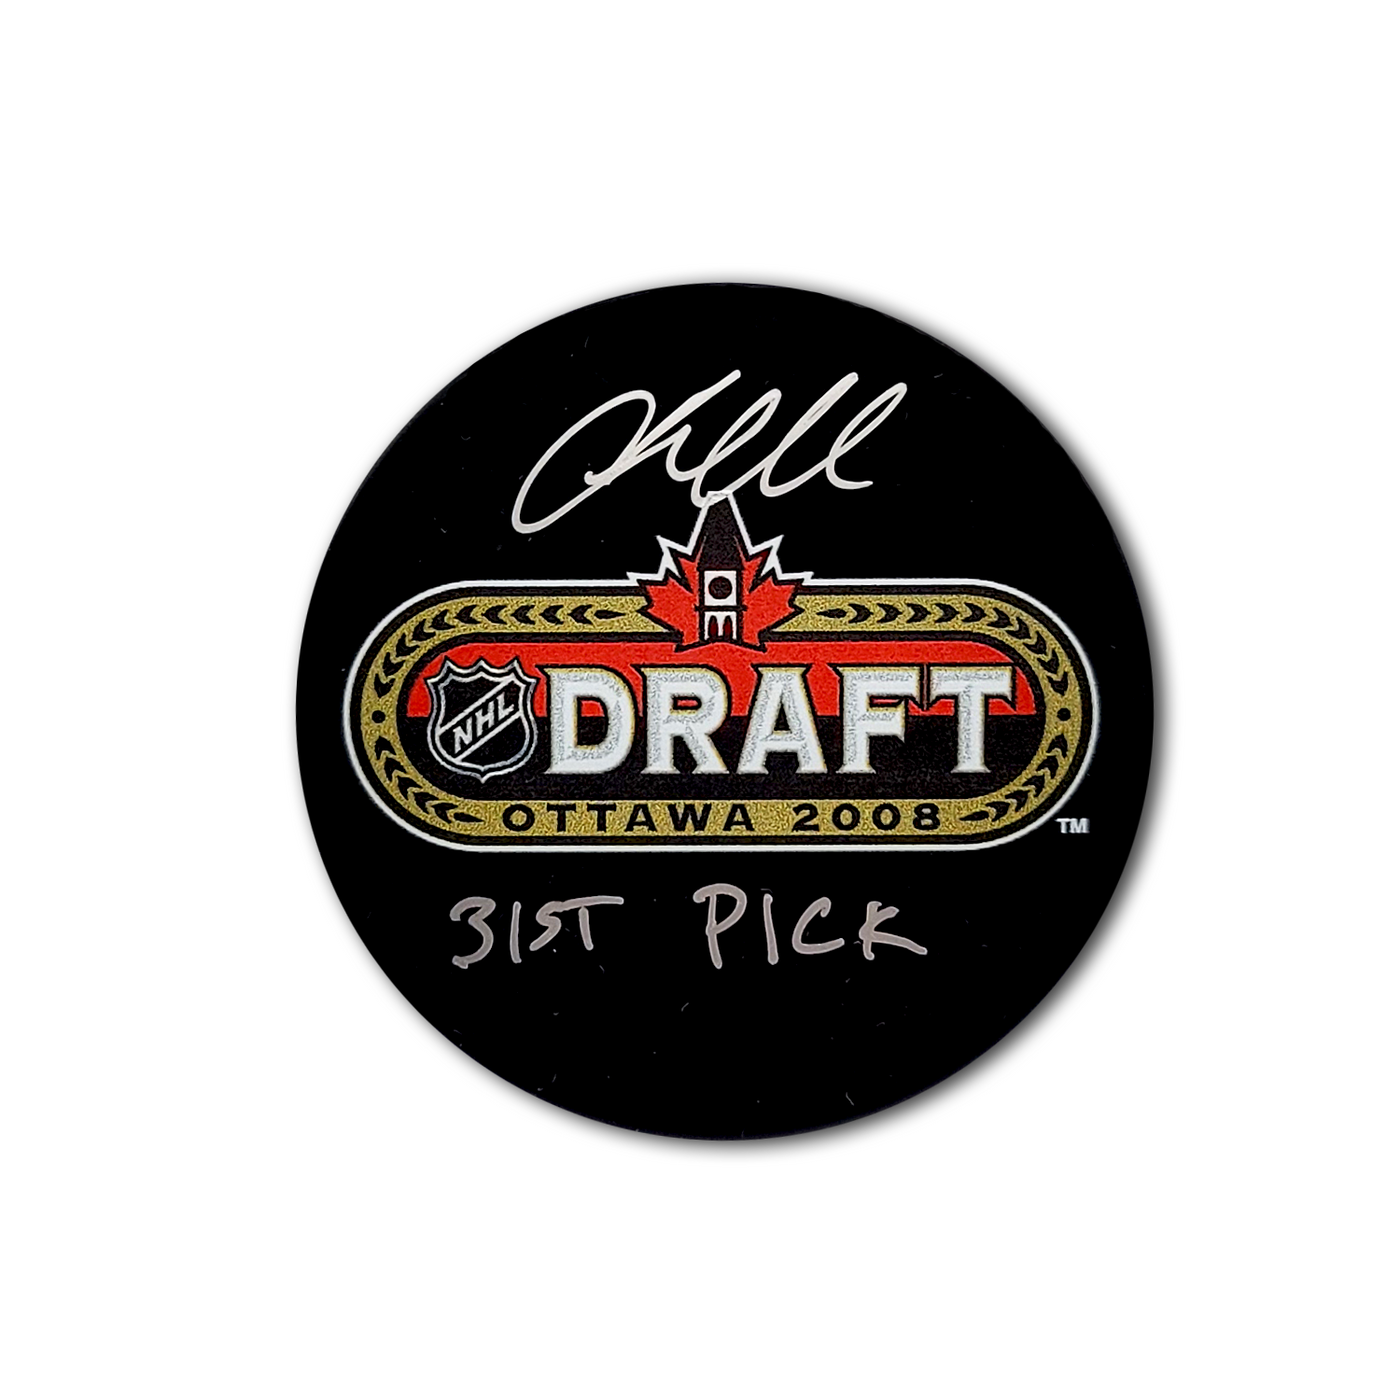 Jacob Markstrom 2008 Draft Day Autographed Hockey Puck Inscribed 31st Pick